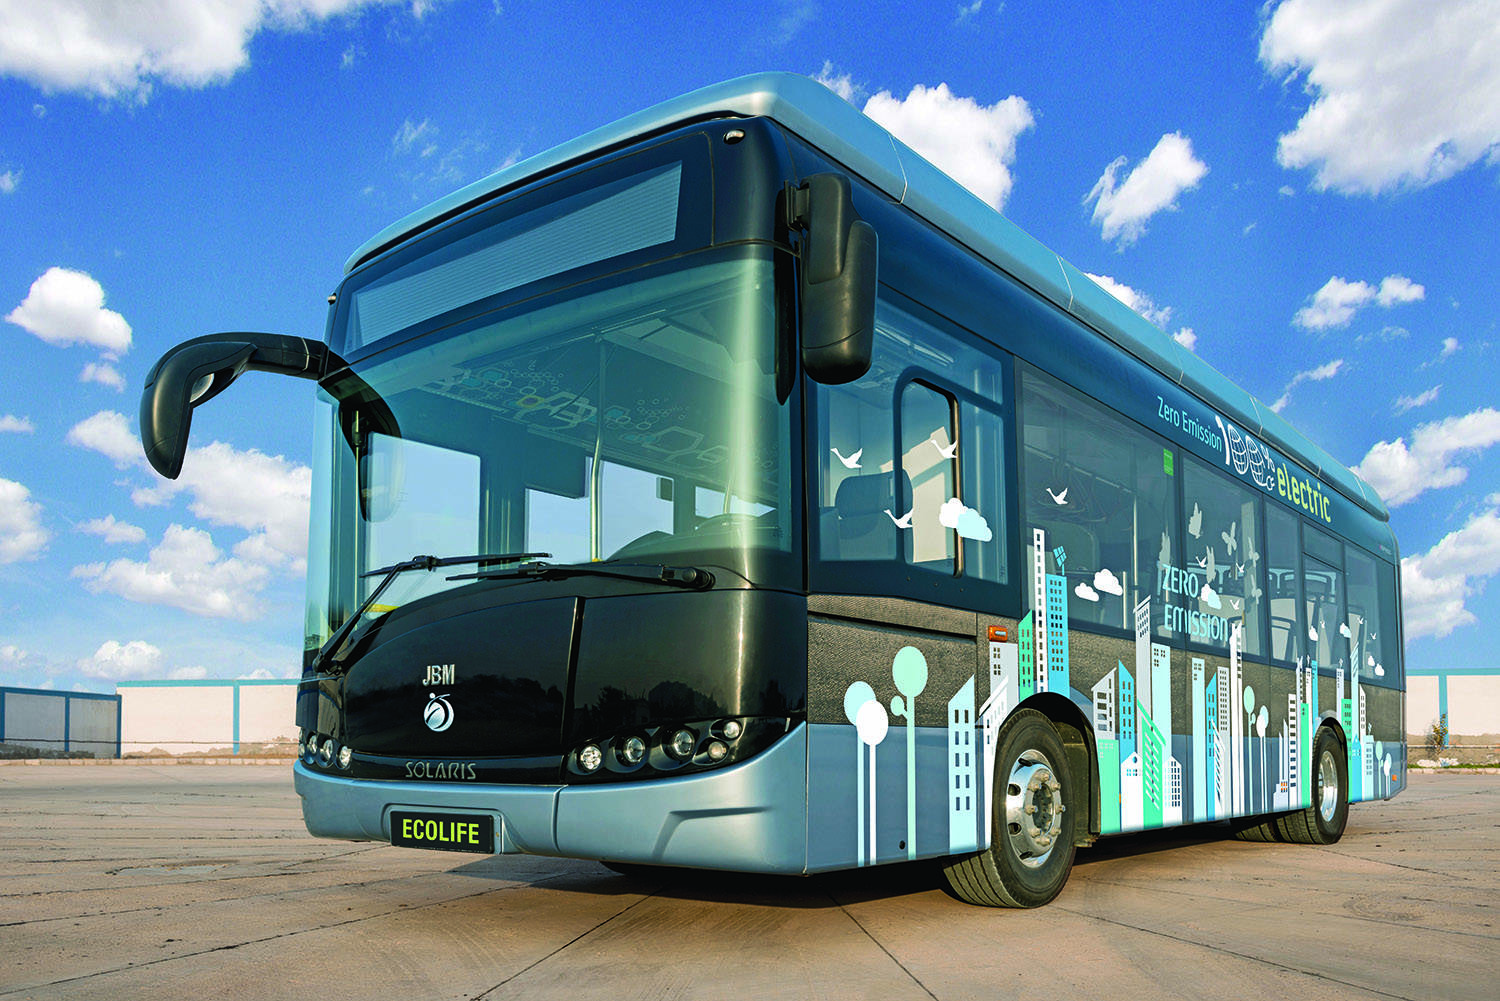 electric bus manufacturers in India